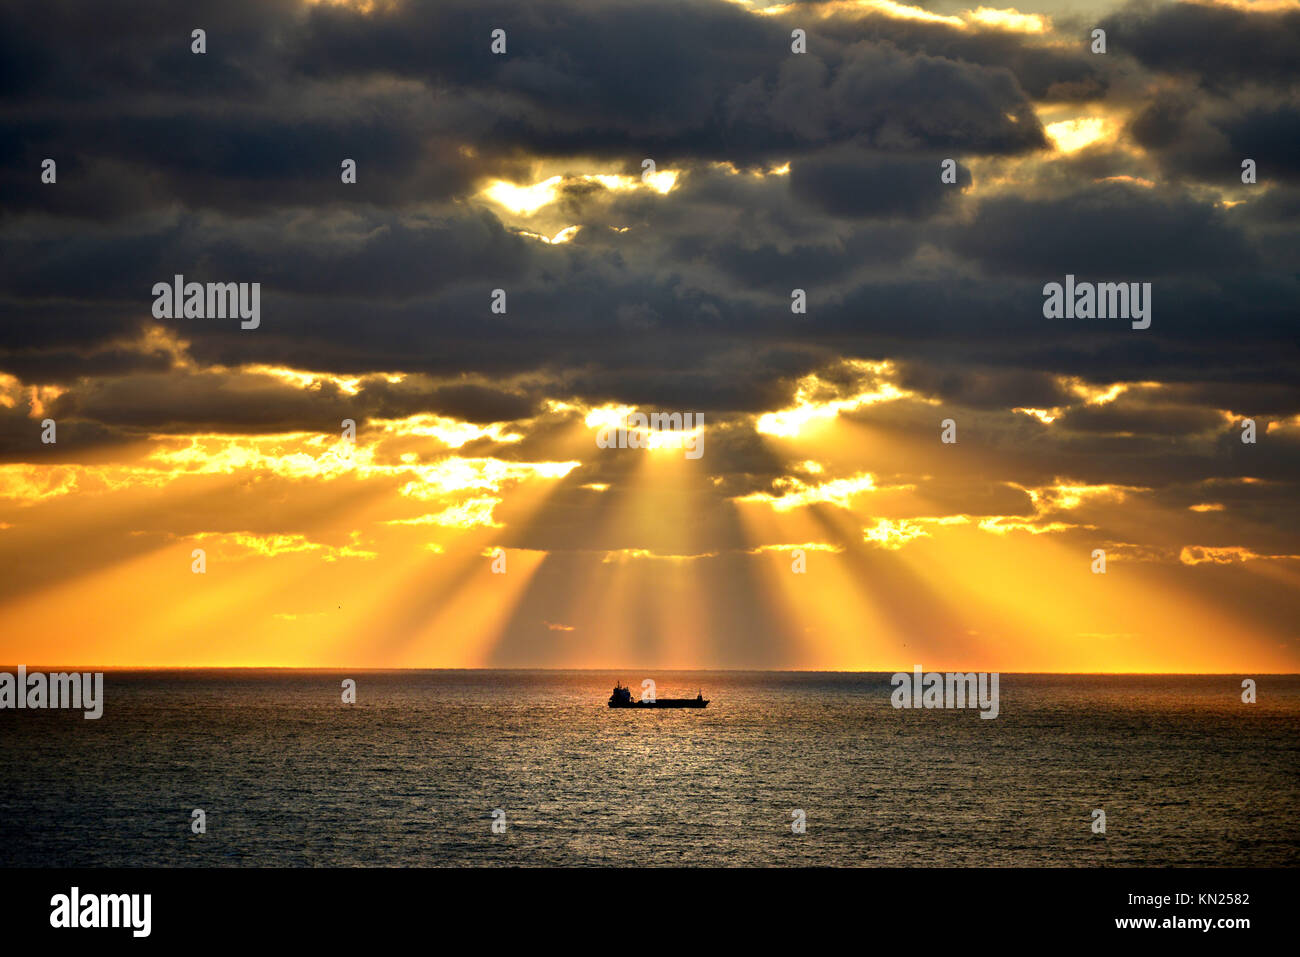 Container ship lit by rays of the setting sun, English channel. Stock Photo